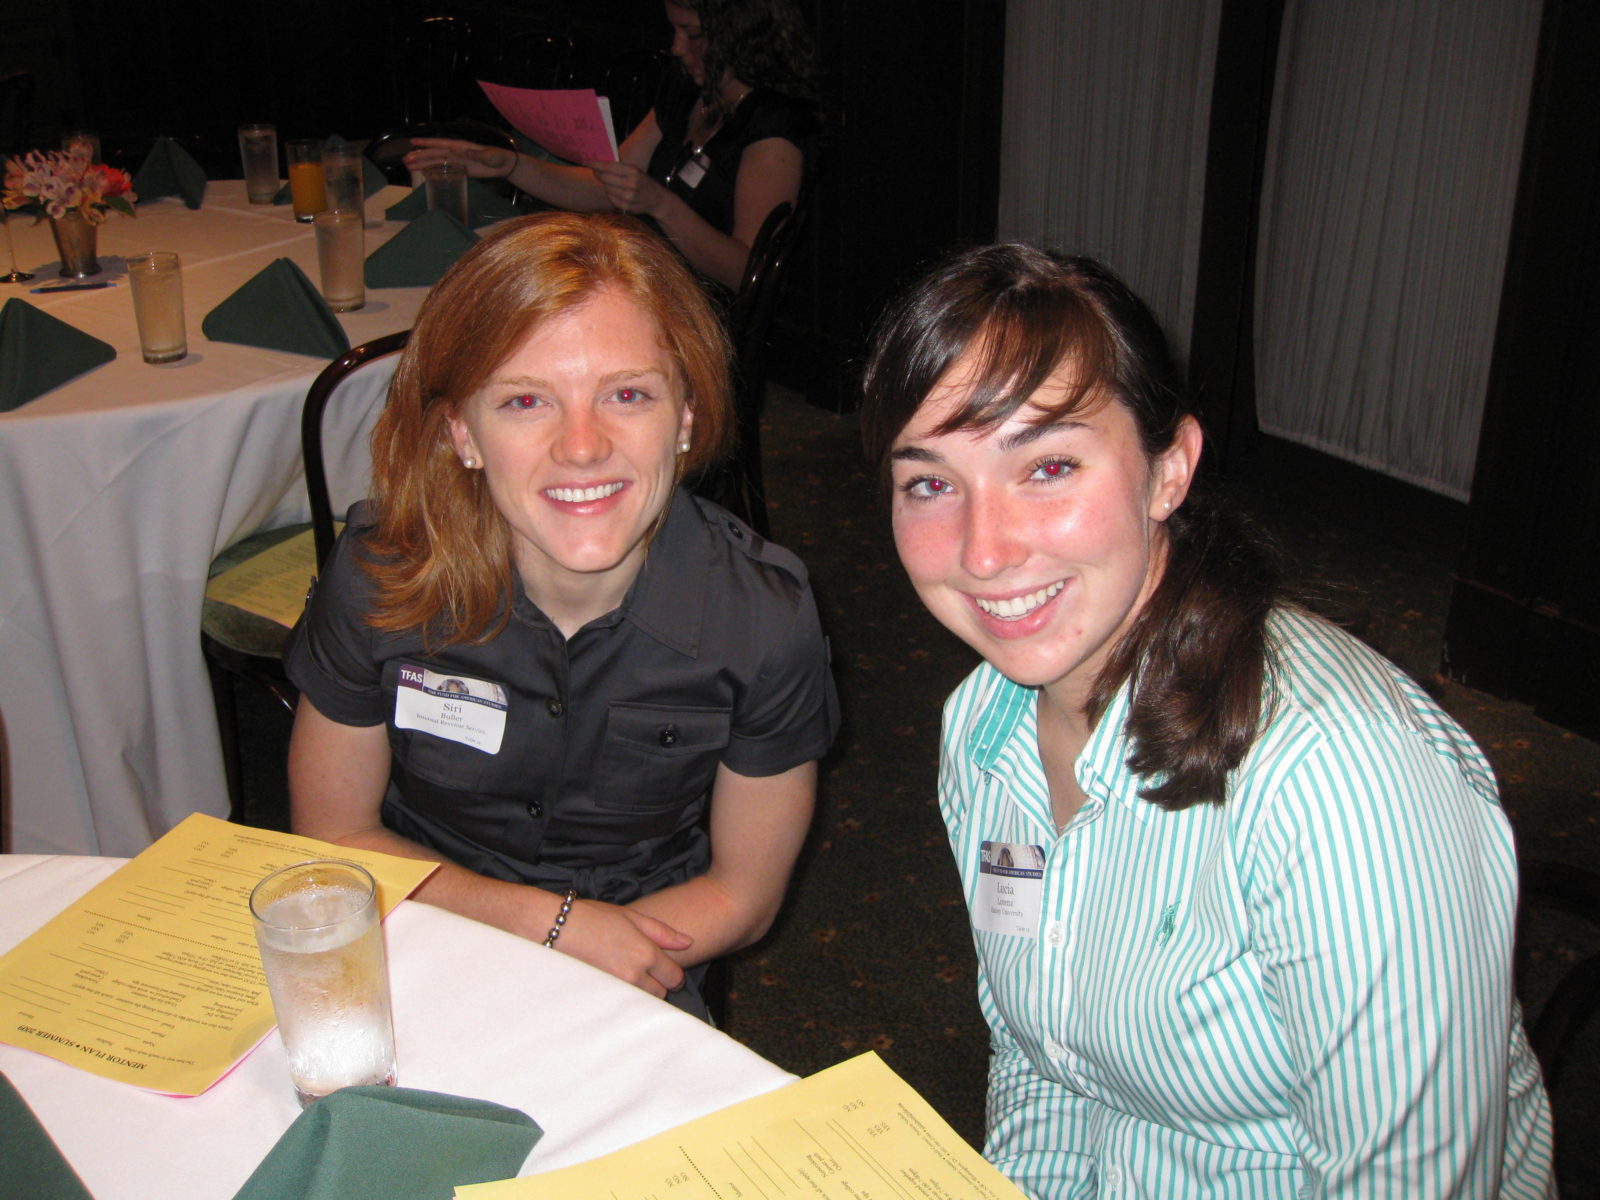 (l.-r.) Siri Buller (P 04), a TFAS Leadership Fellow and mentor, meets her mentee Lucia Lorenz who is a current IPVS student.